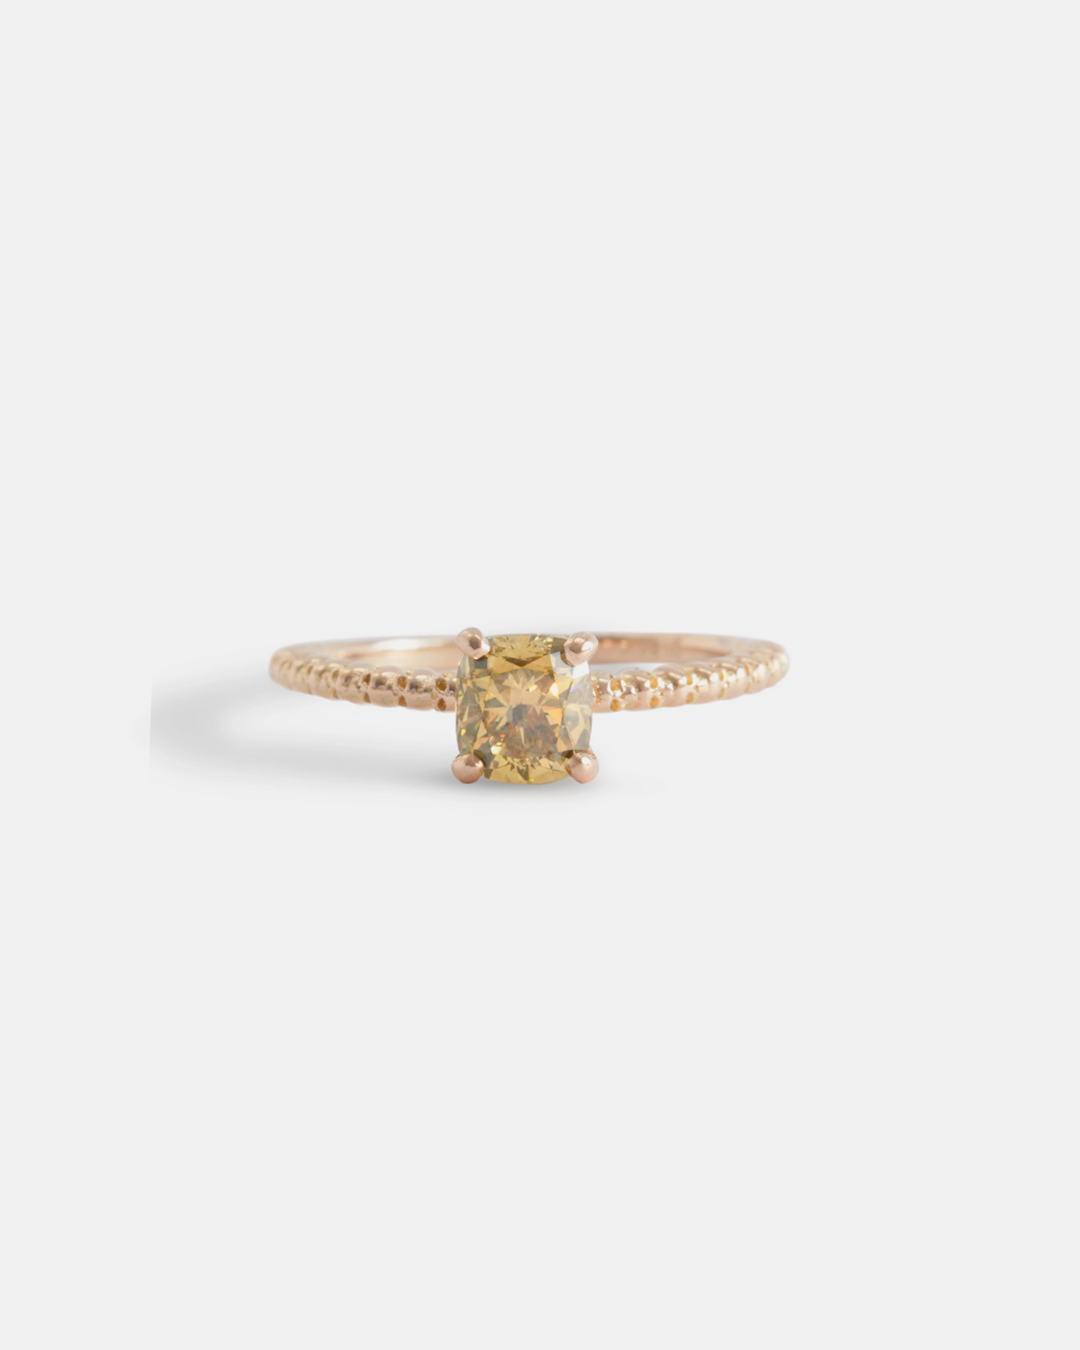 Someone To Look Over You / Champagne Diamond By fitzgerald jewelry